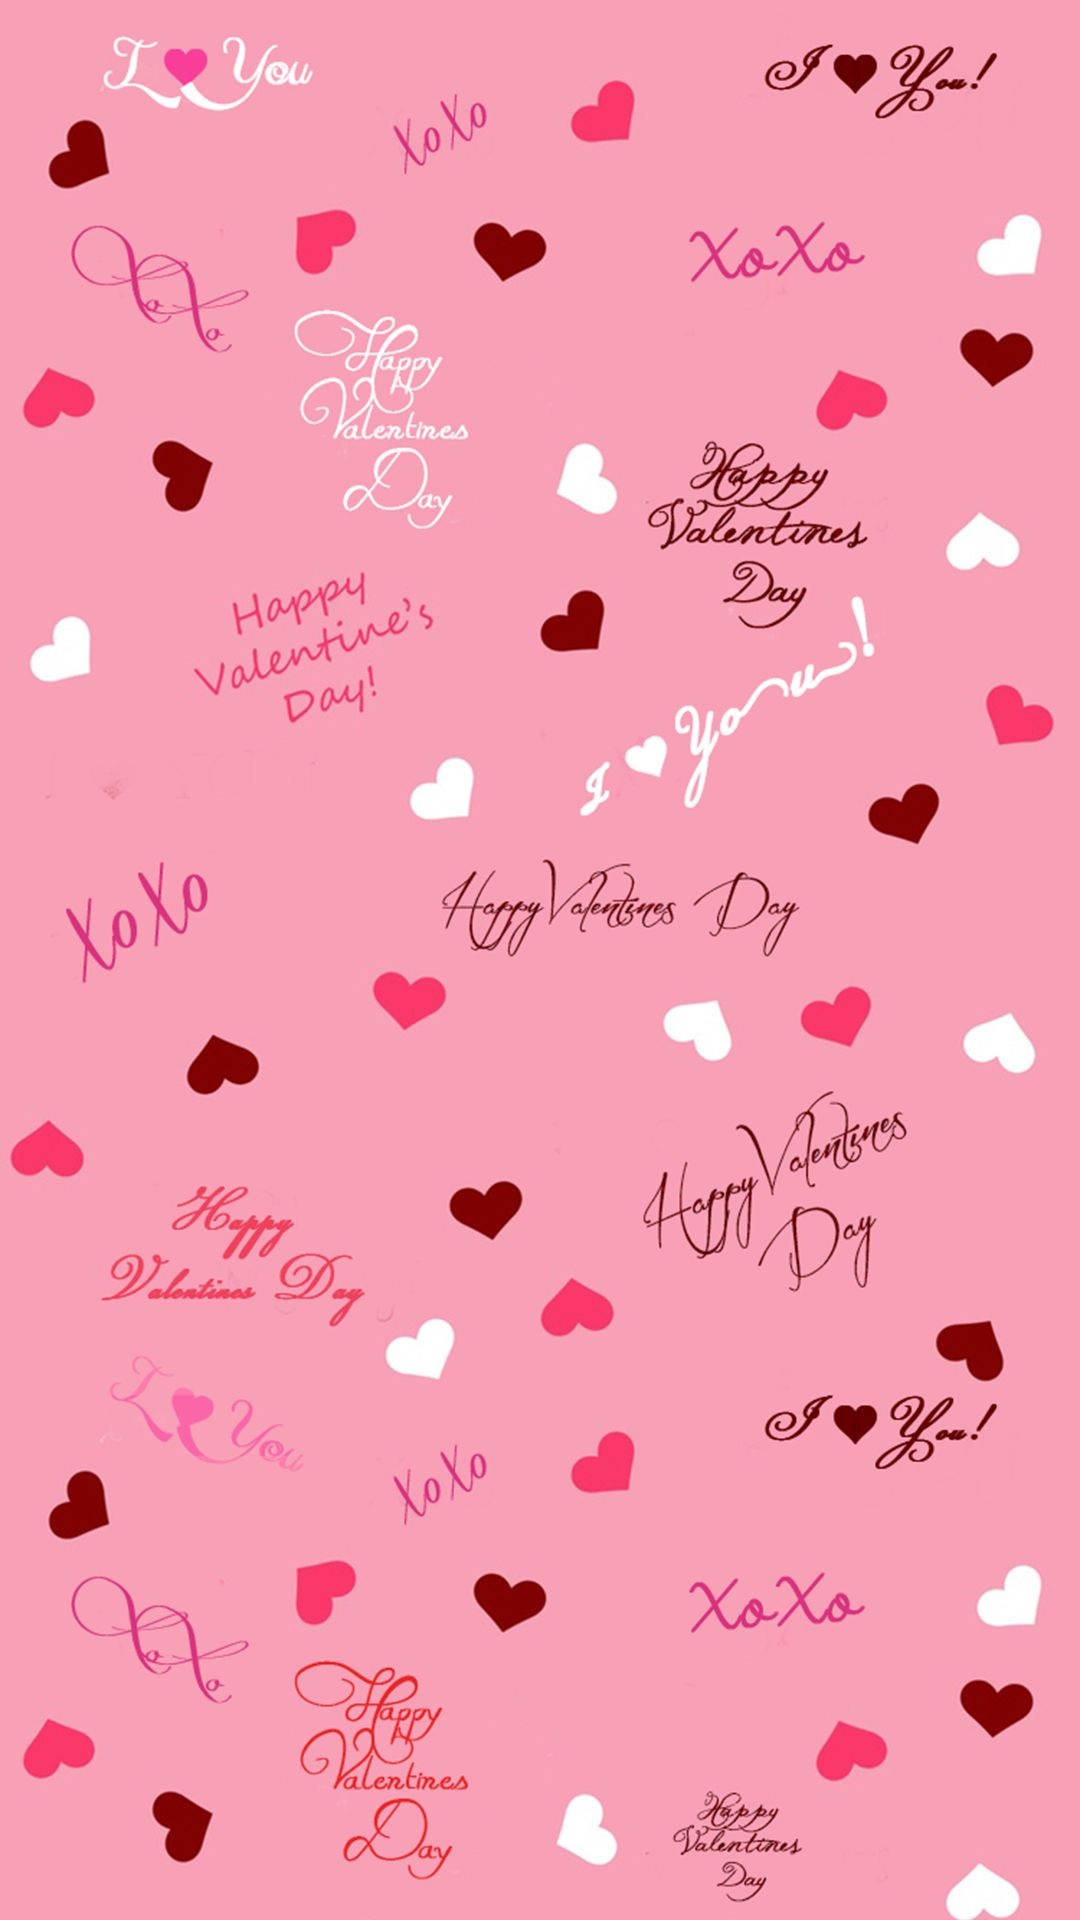 Valentine's Day, Cute wallpapers, Love-filled celebrations, Heartwarming moments, 1080x1920 Full HD Handy